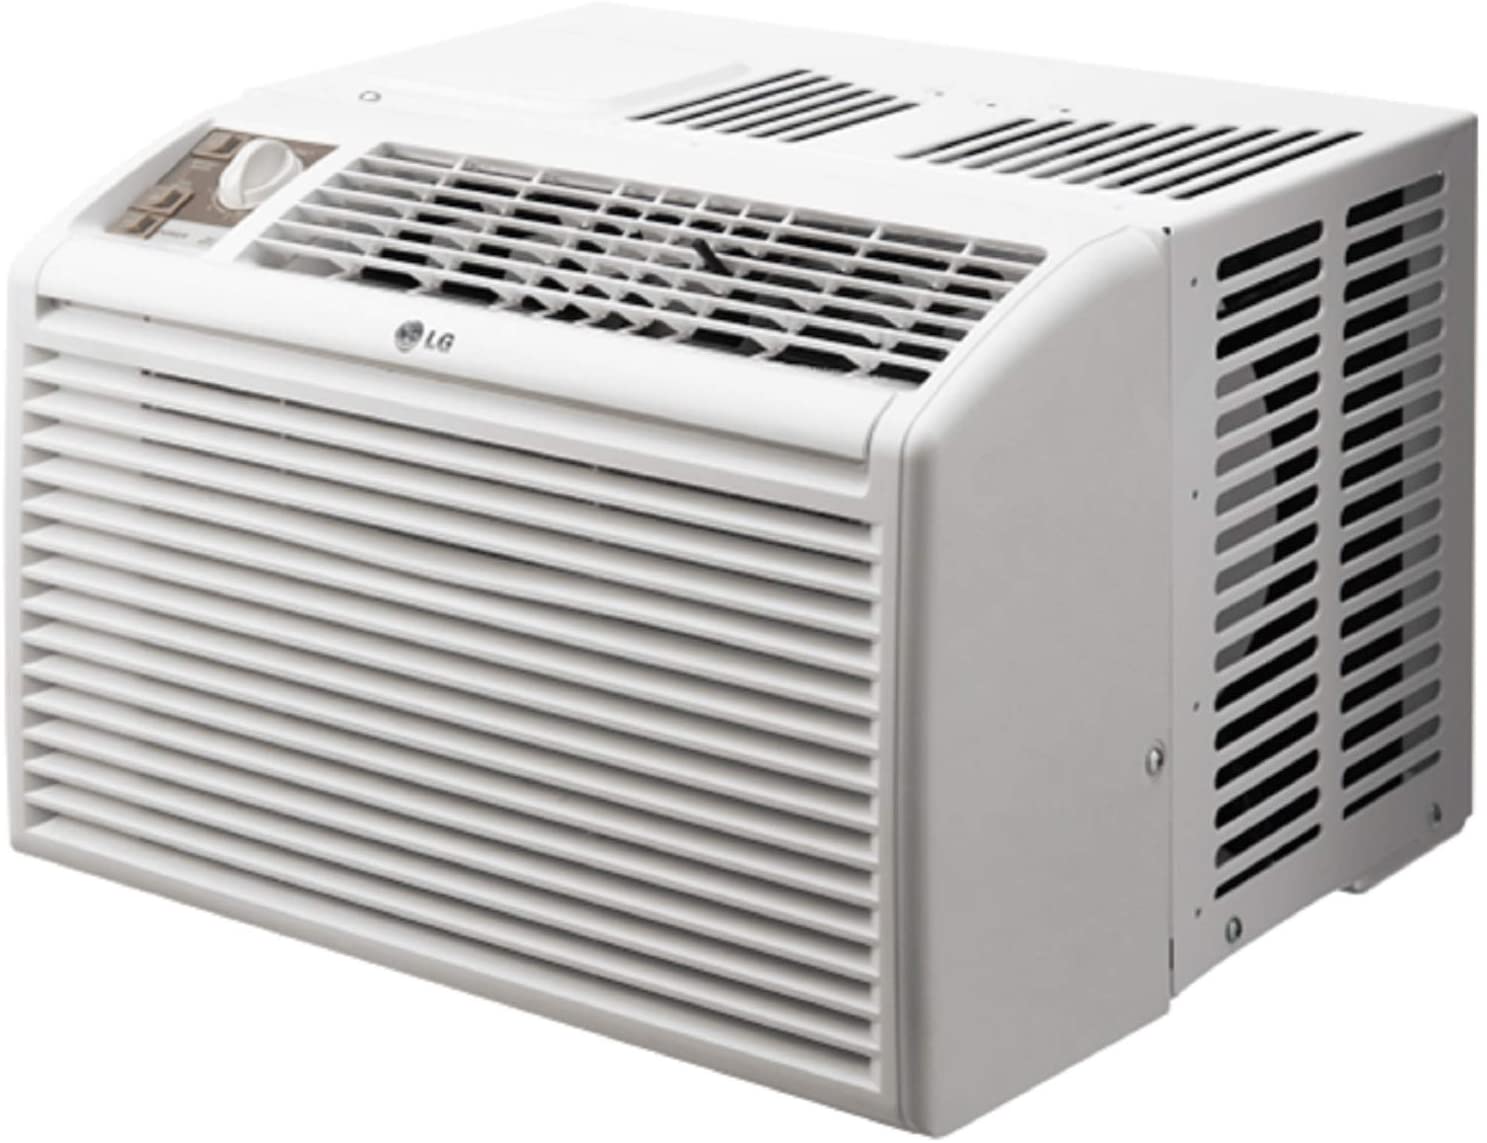 10 Best 5000 BTU Air Conditioner 2022 Review [ Window/ Portable ACs] Small AC for 150 Ft Room All In One Cooling Gear Lab: Any Refrigerators Air Conditioners Freezers Ice Makers Coolers Fans Reviewed And Compared.